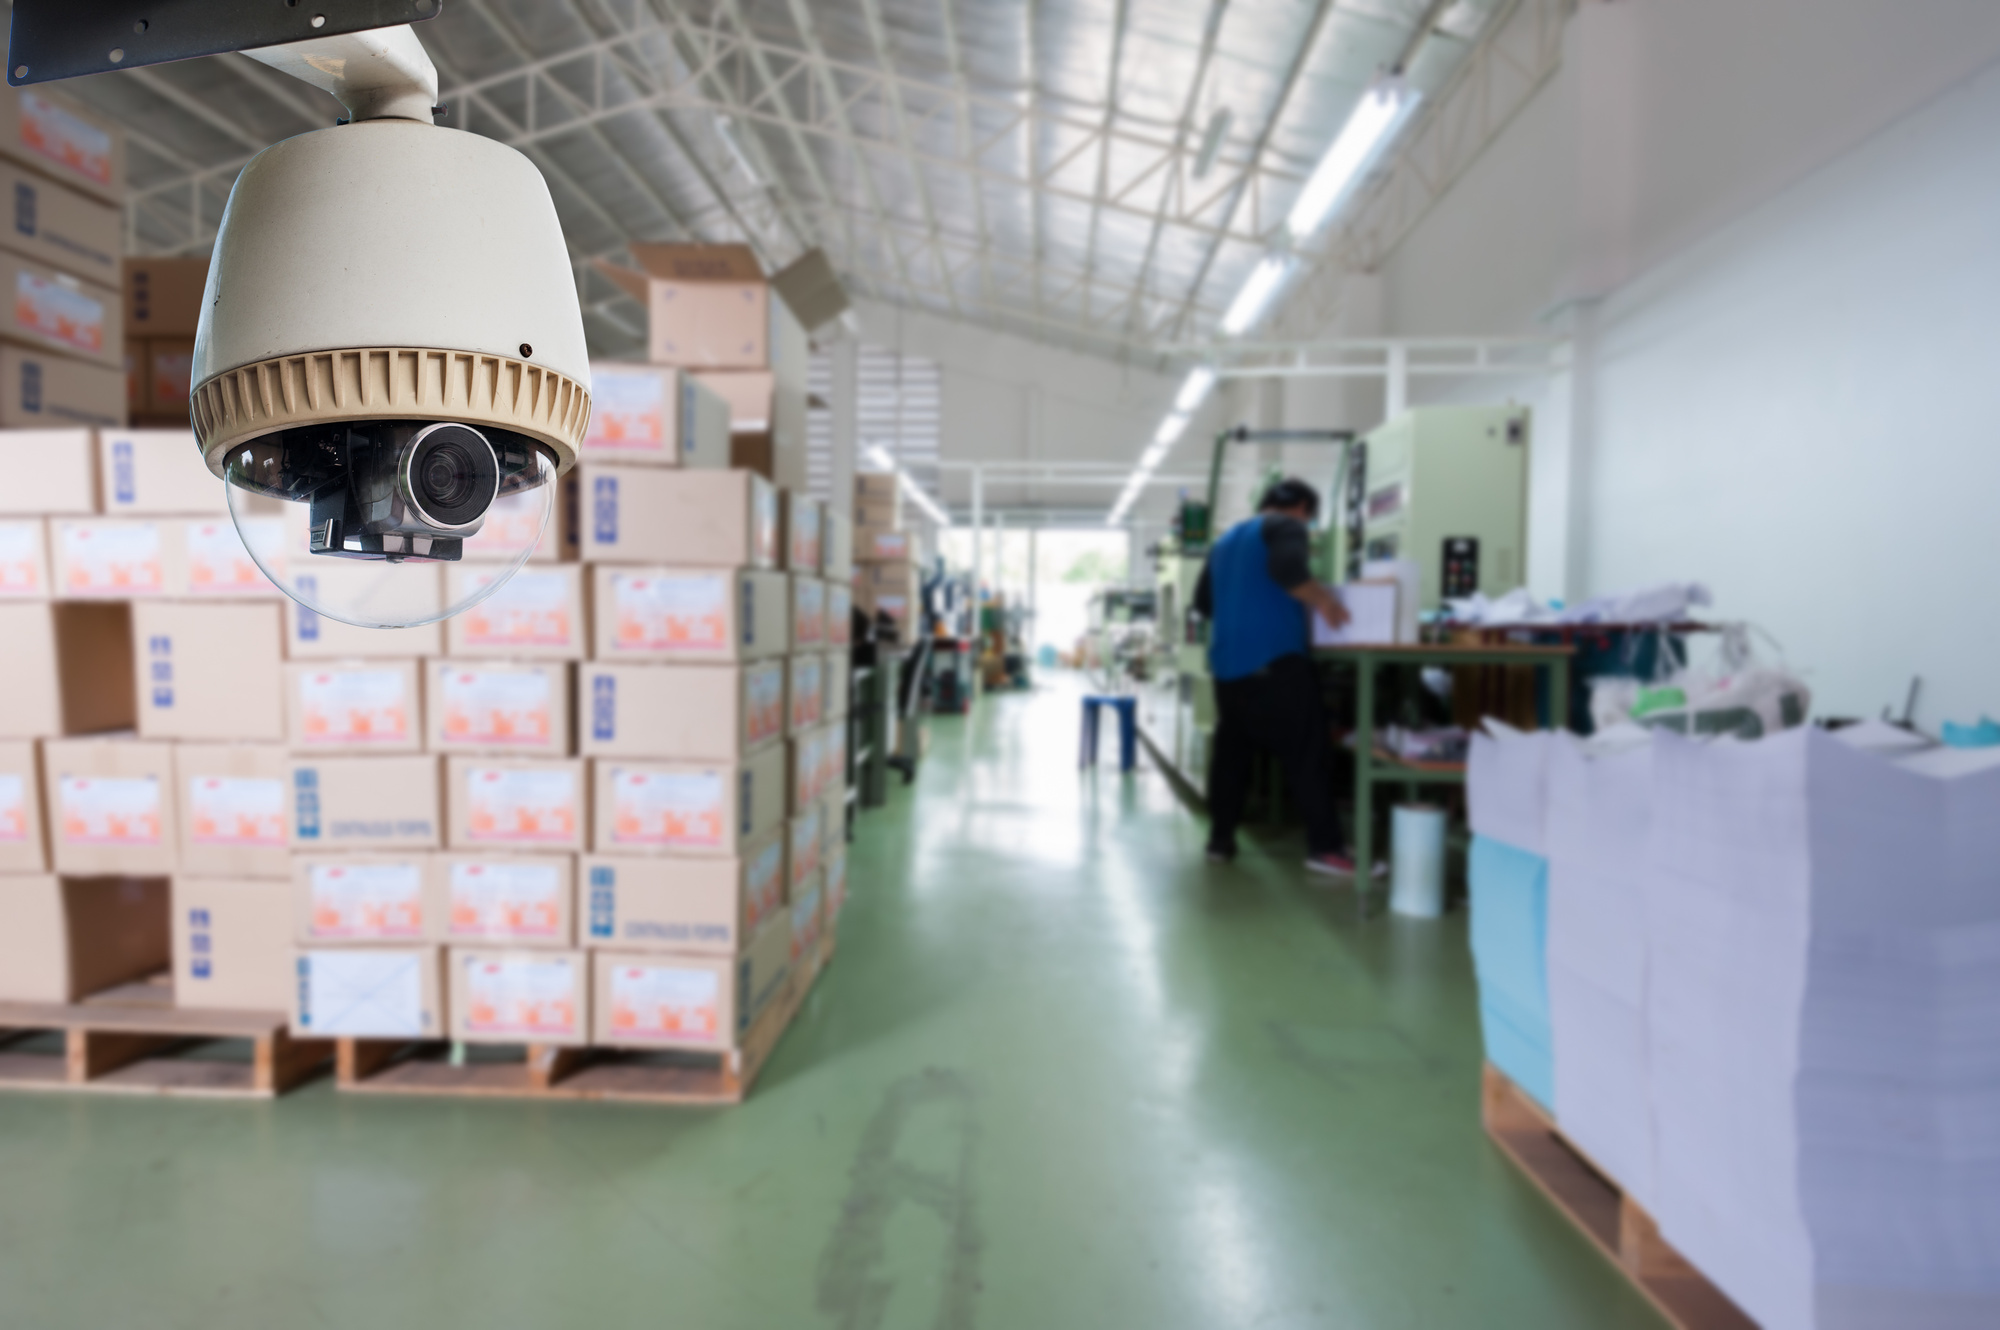 Security Camera on a Manufacturing Plant